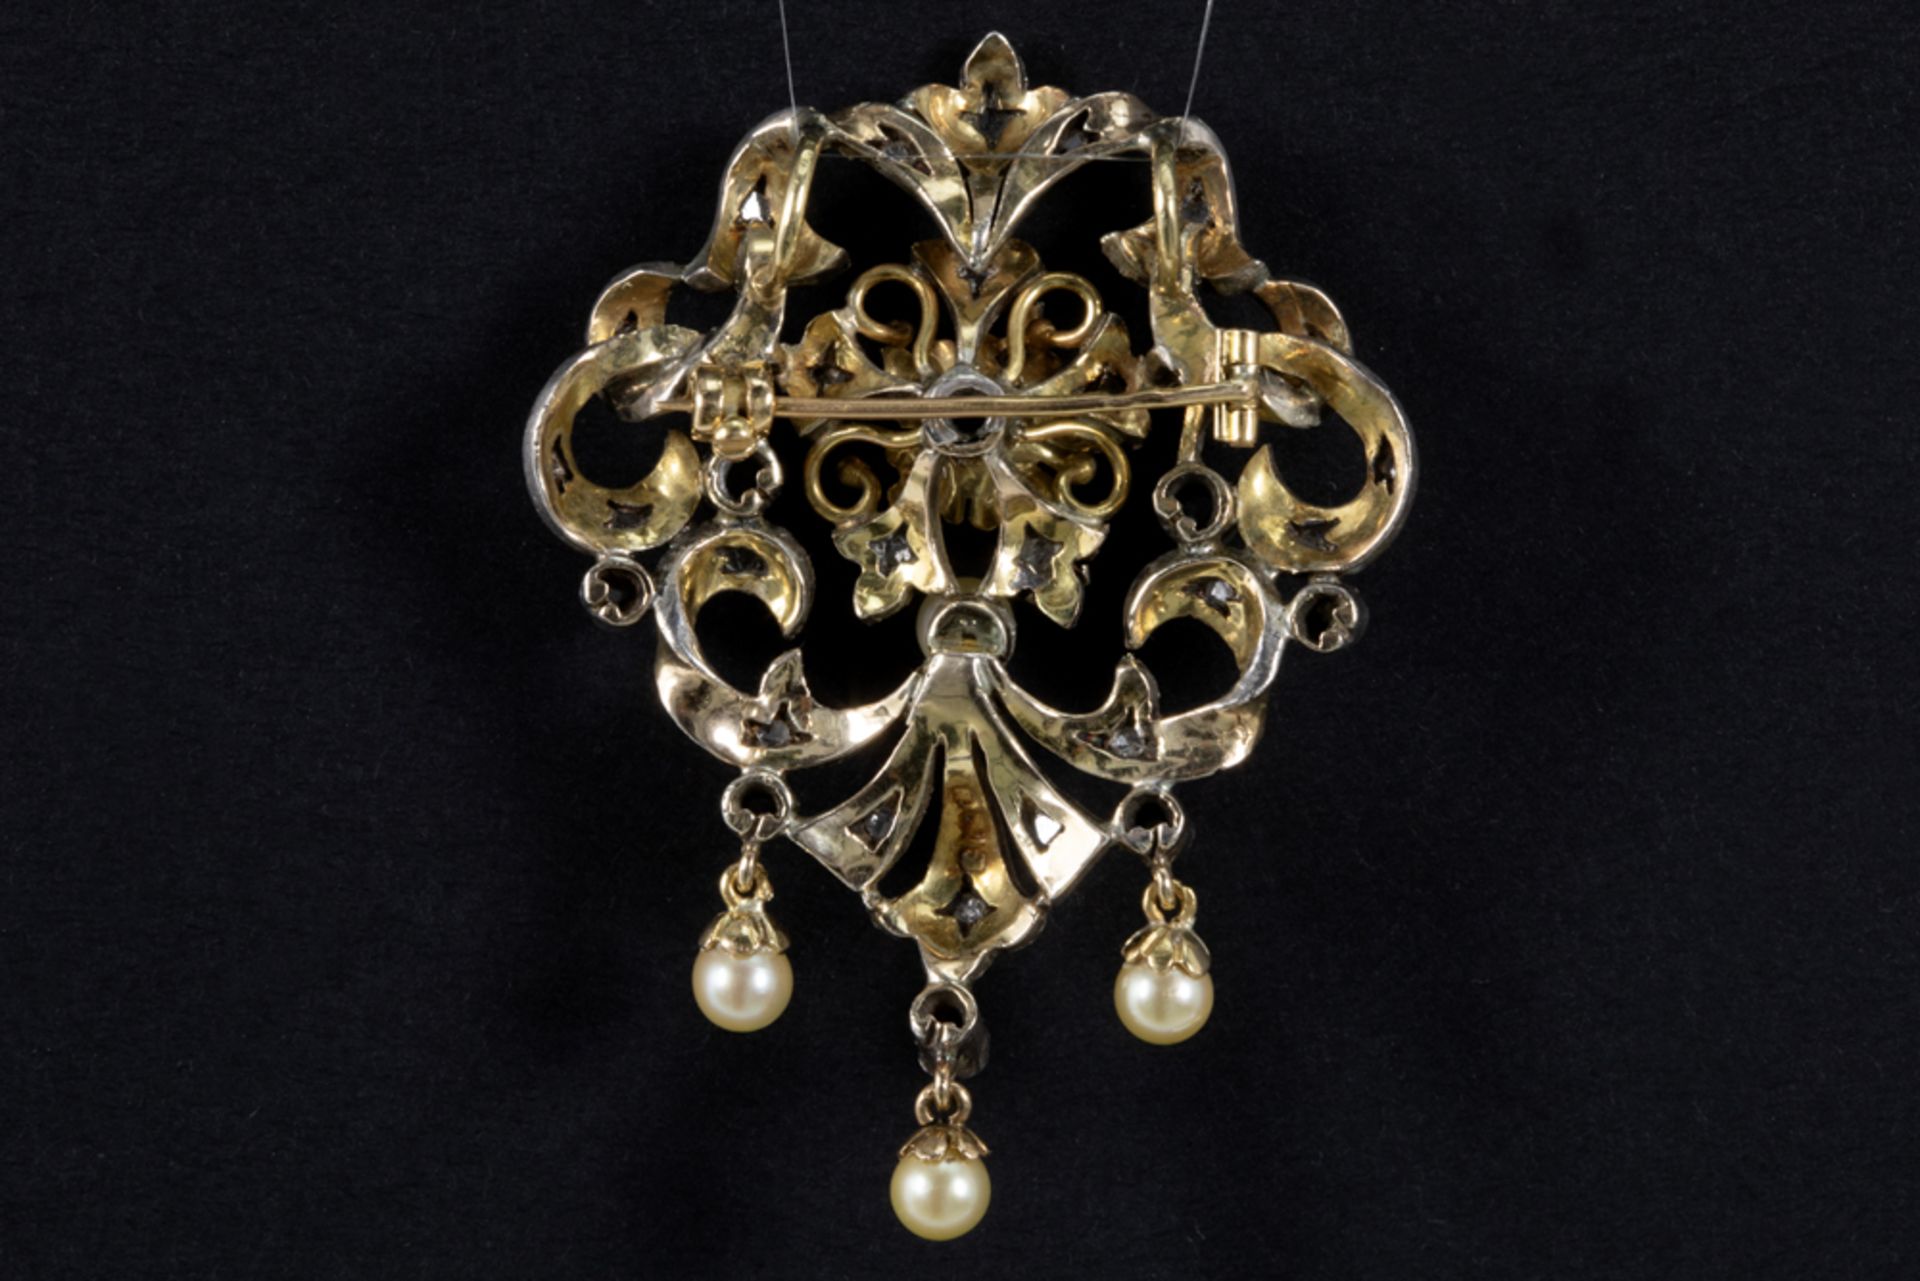 antique brooch/pendant in silver on gold with rose cut diamonds and pearls || Antieke broche/ - Bild 2 aus 2